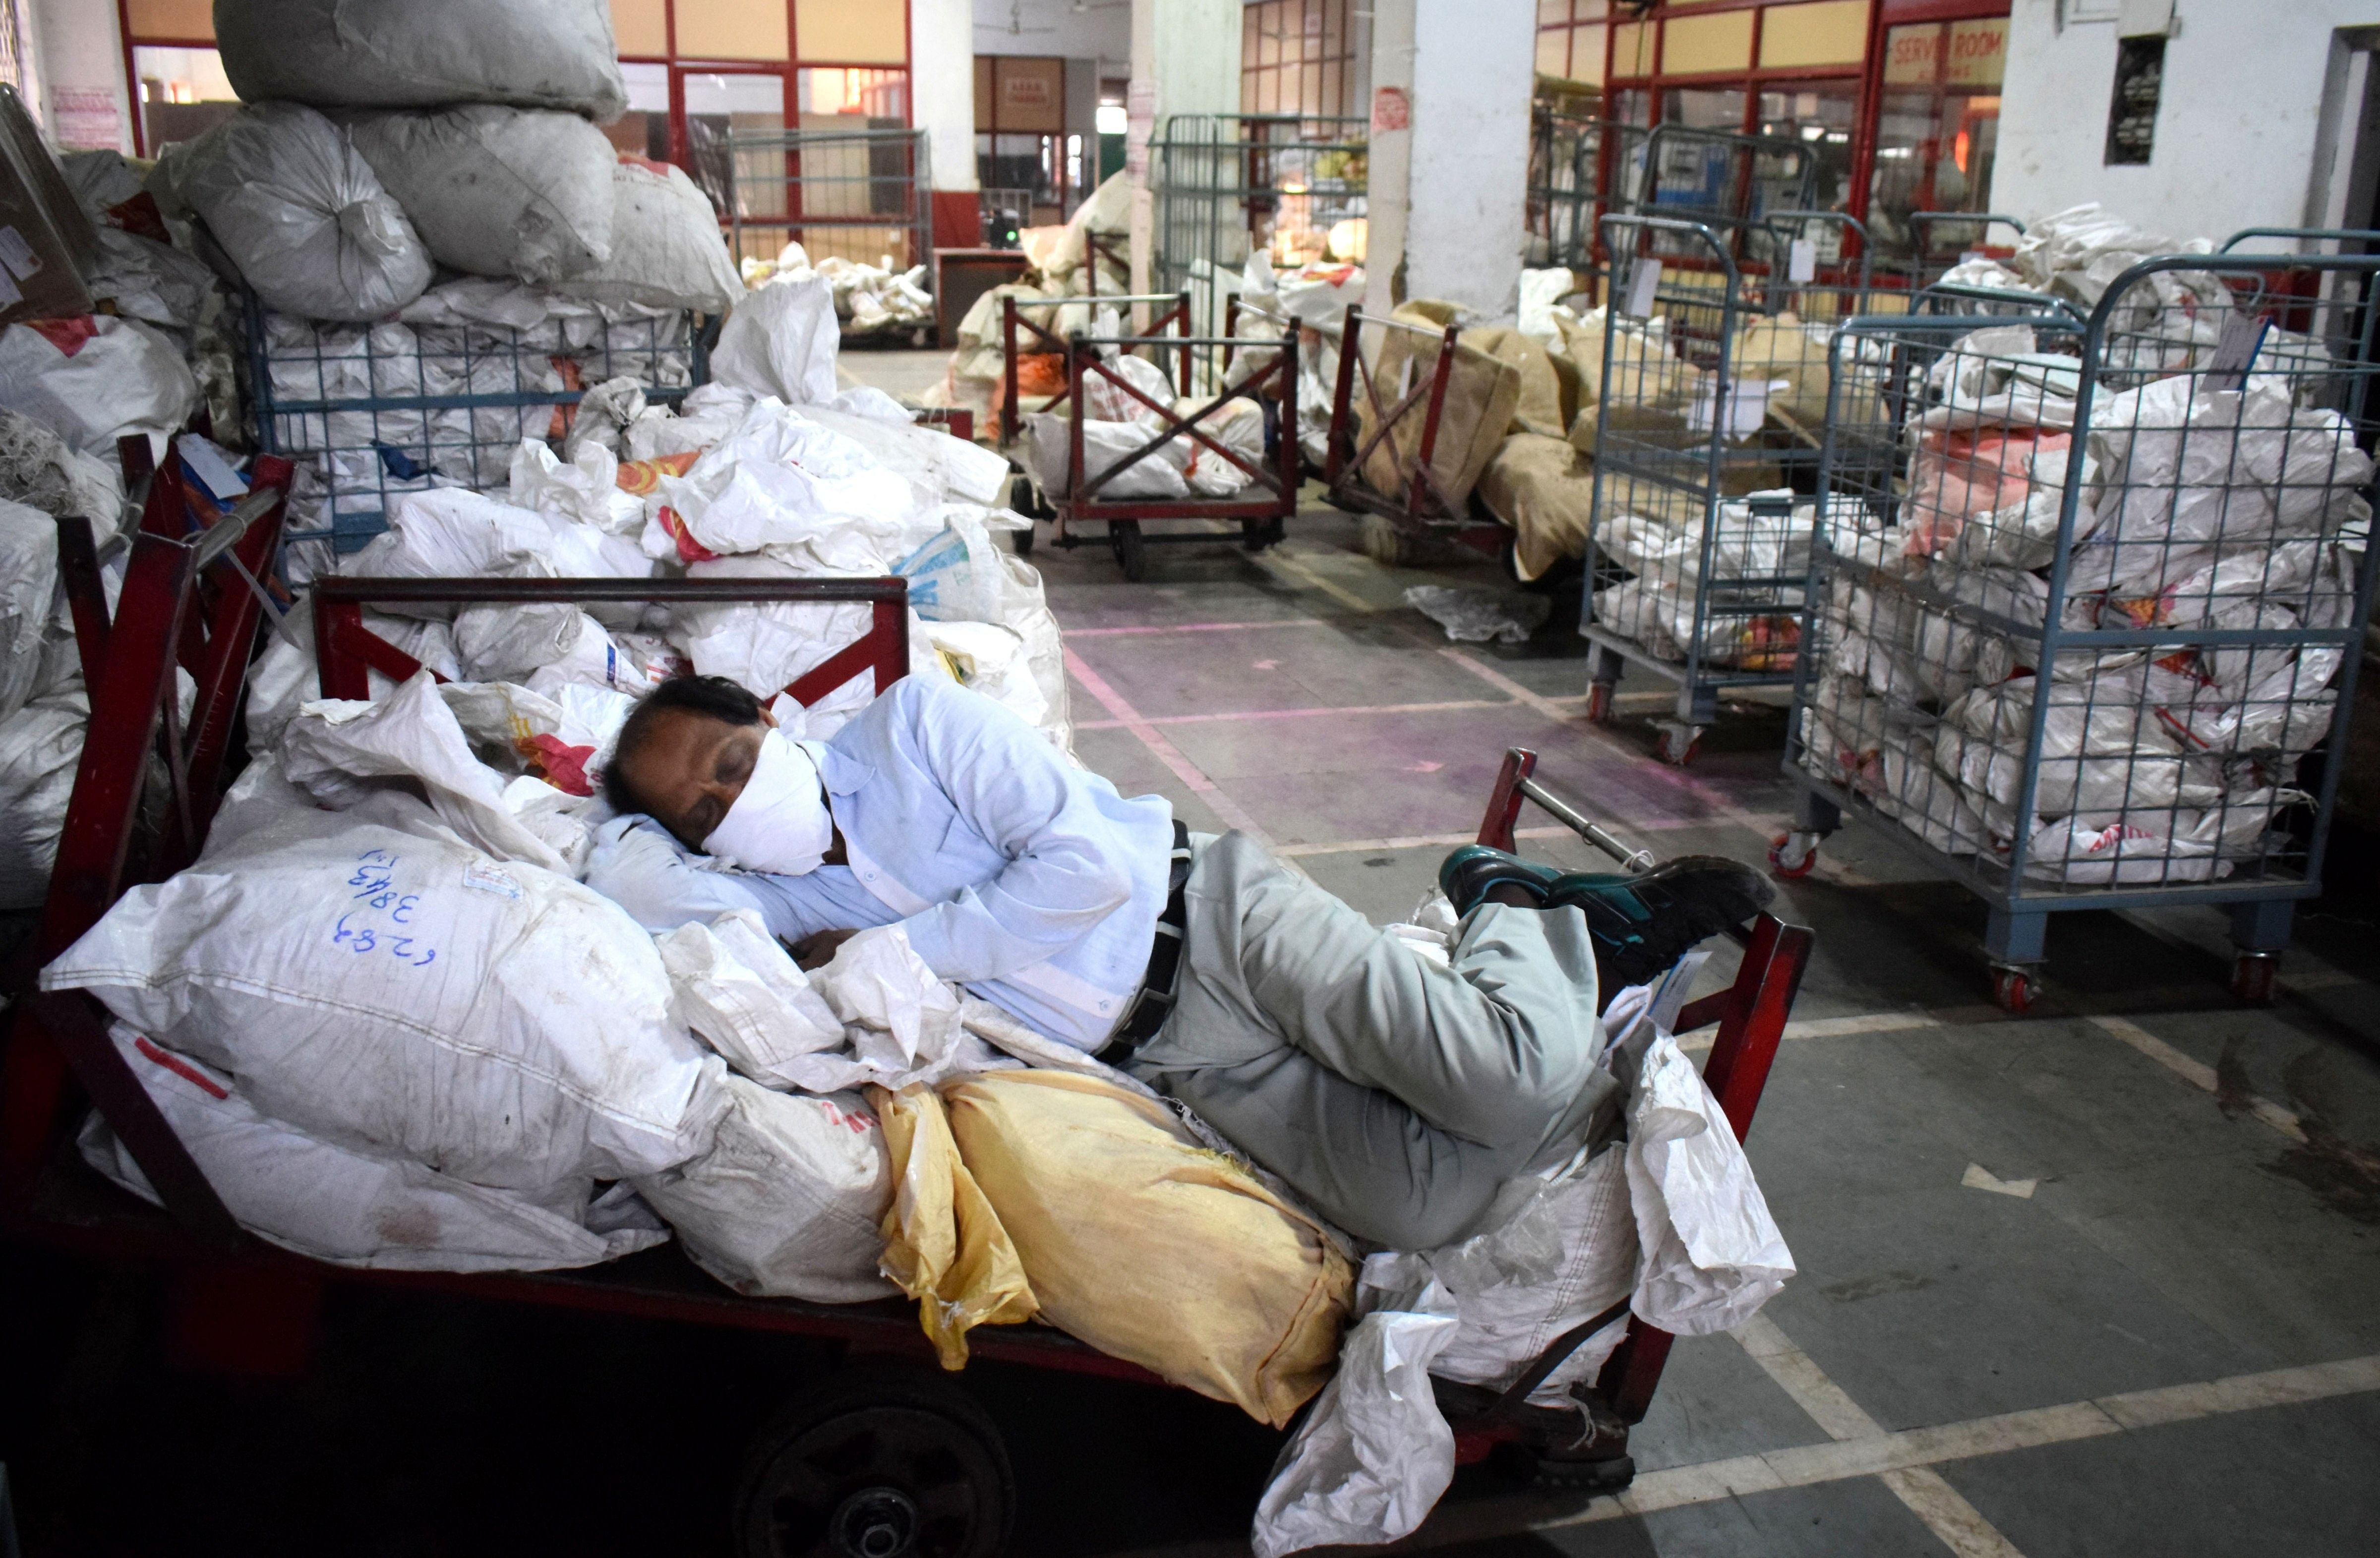 A man sleeps on parcel bags at Prayagraj Railway Station, on the second day of the nationwide lockdown. (Credit: PTI)